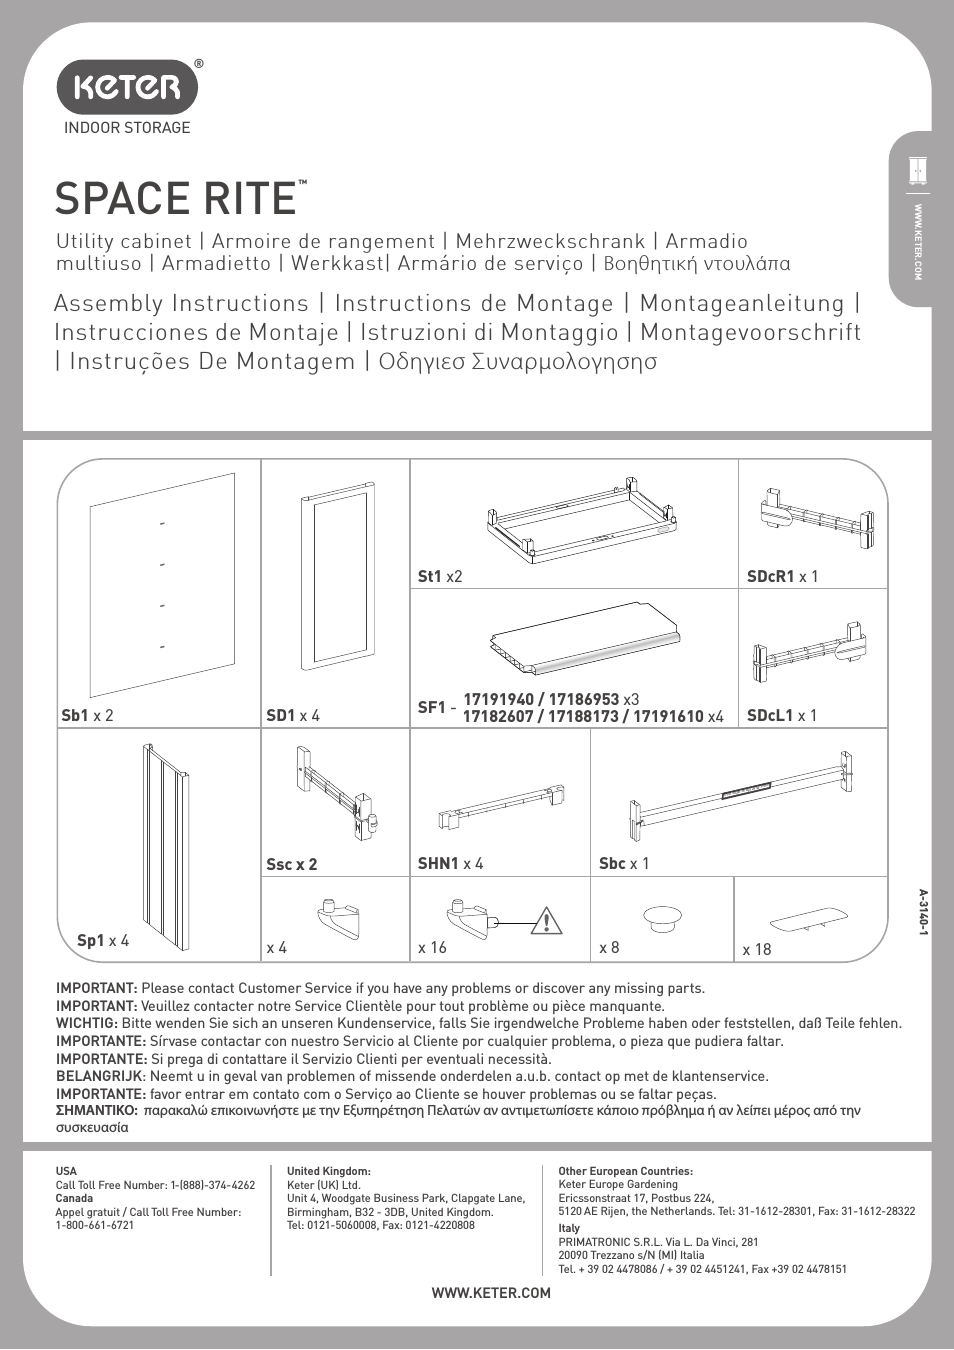 Space Rite Utility Cabinet